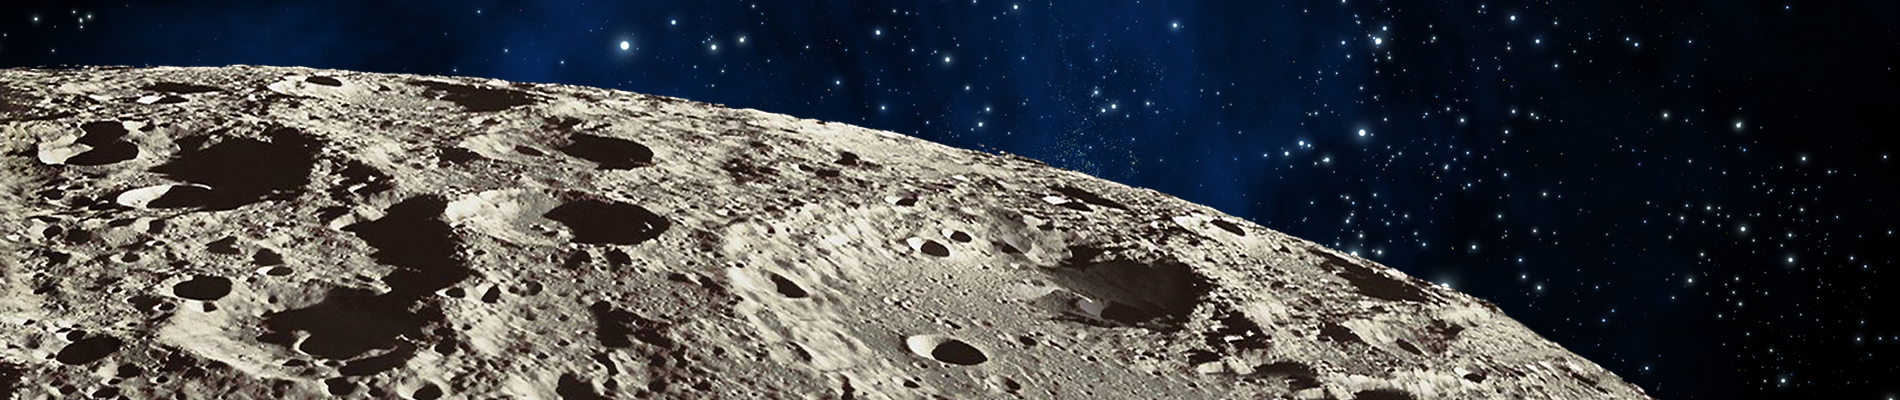 Header image for the Lunar Rover Challenge project